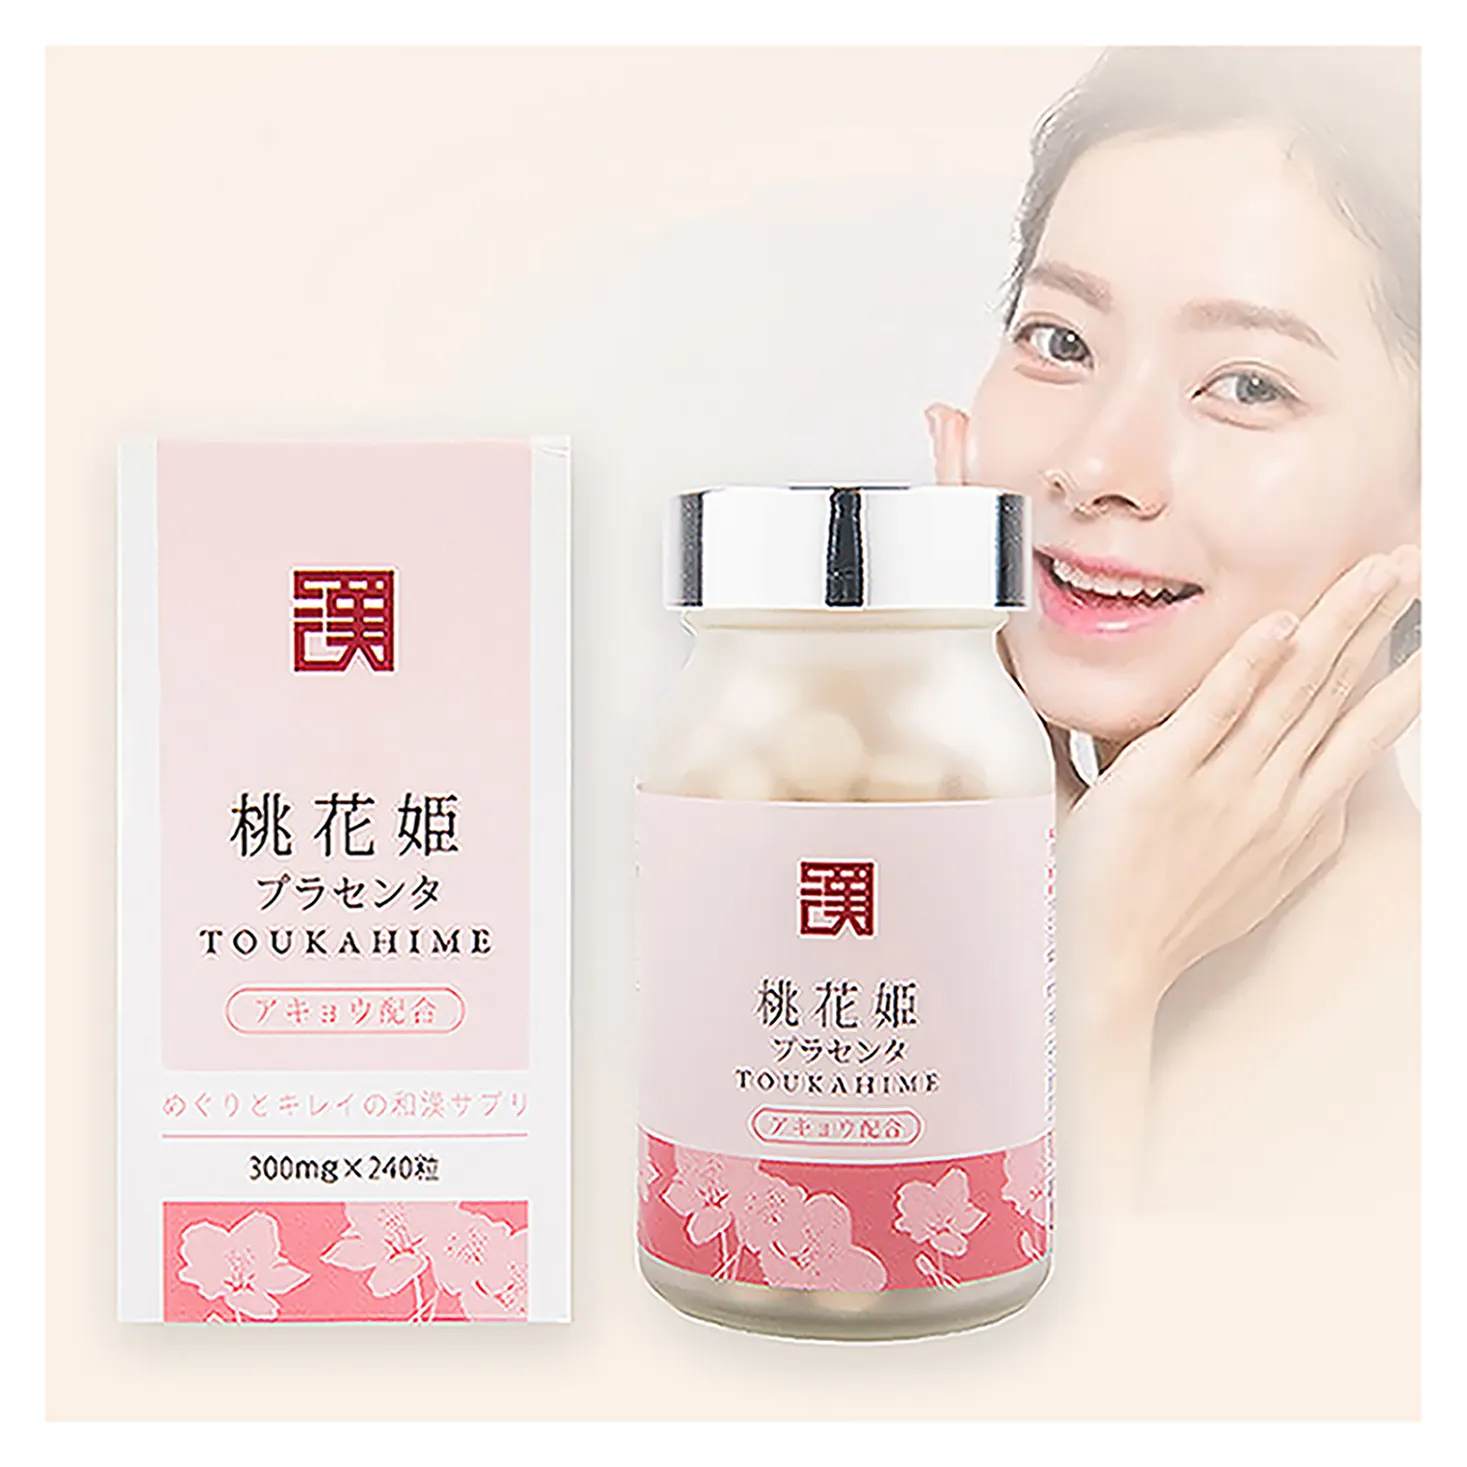 Japanese Hot Sale Collagen Health Care Healthcare Supplements Tablets Skin Whitening